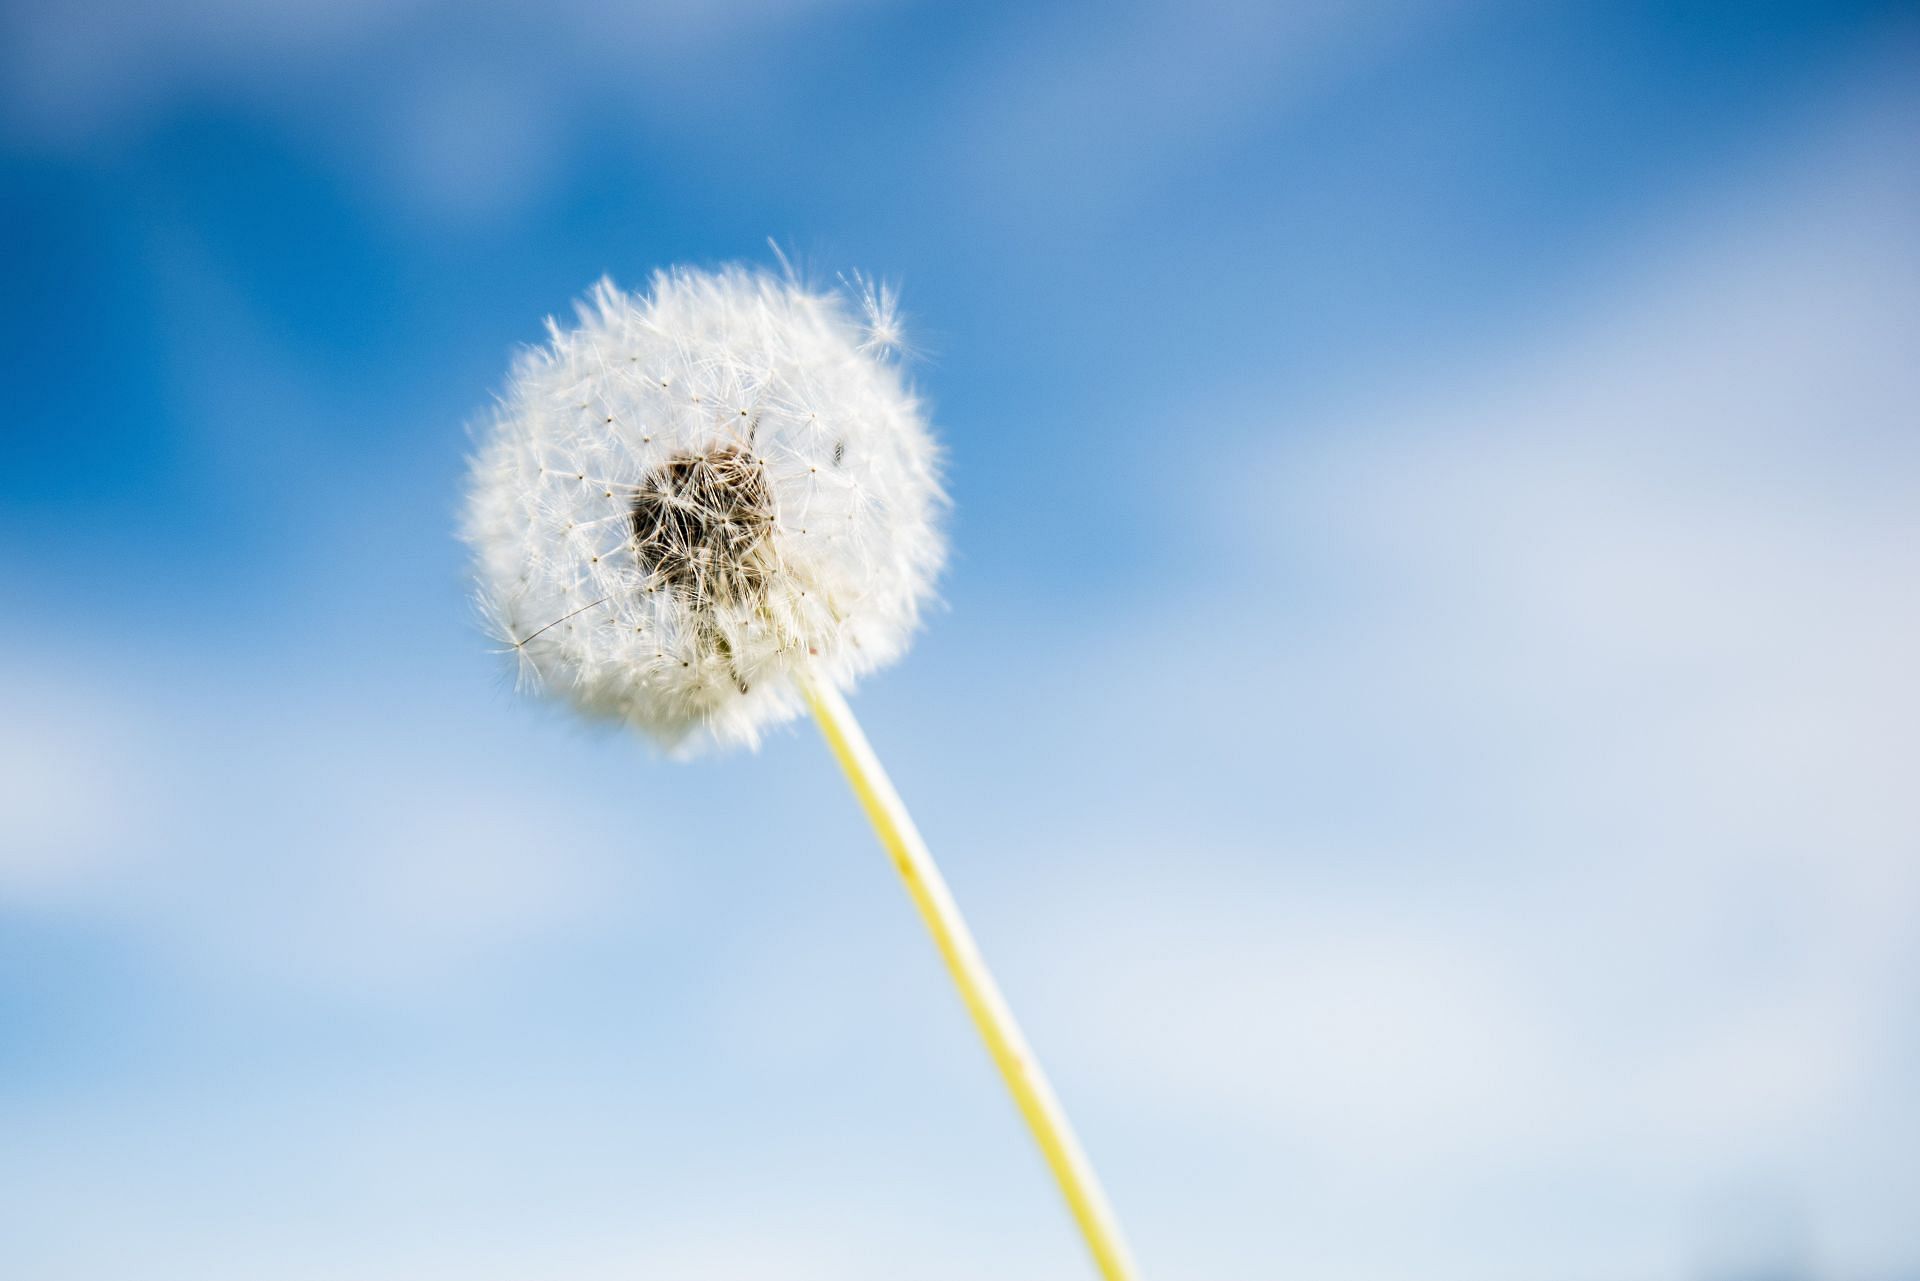 Pollens are one of the main causes of allergies. (Image via Unsplash/ Stephane Mingot)